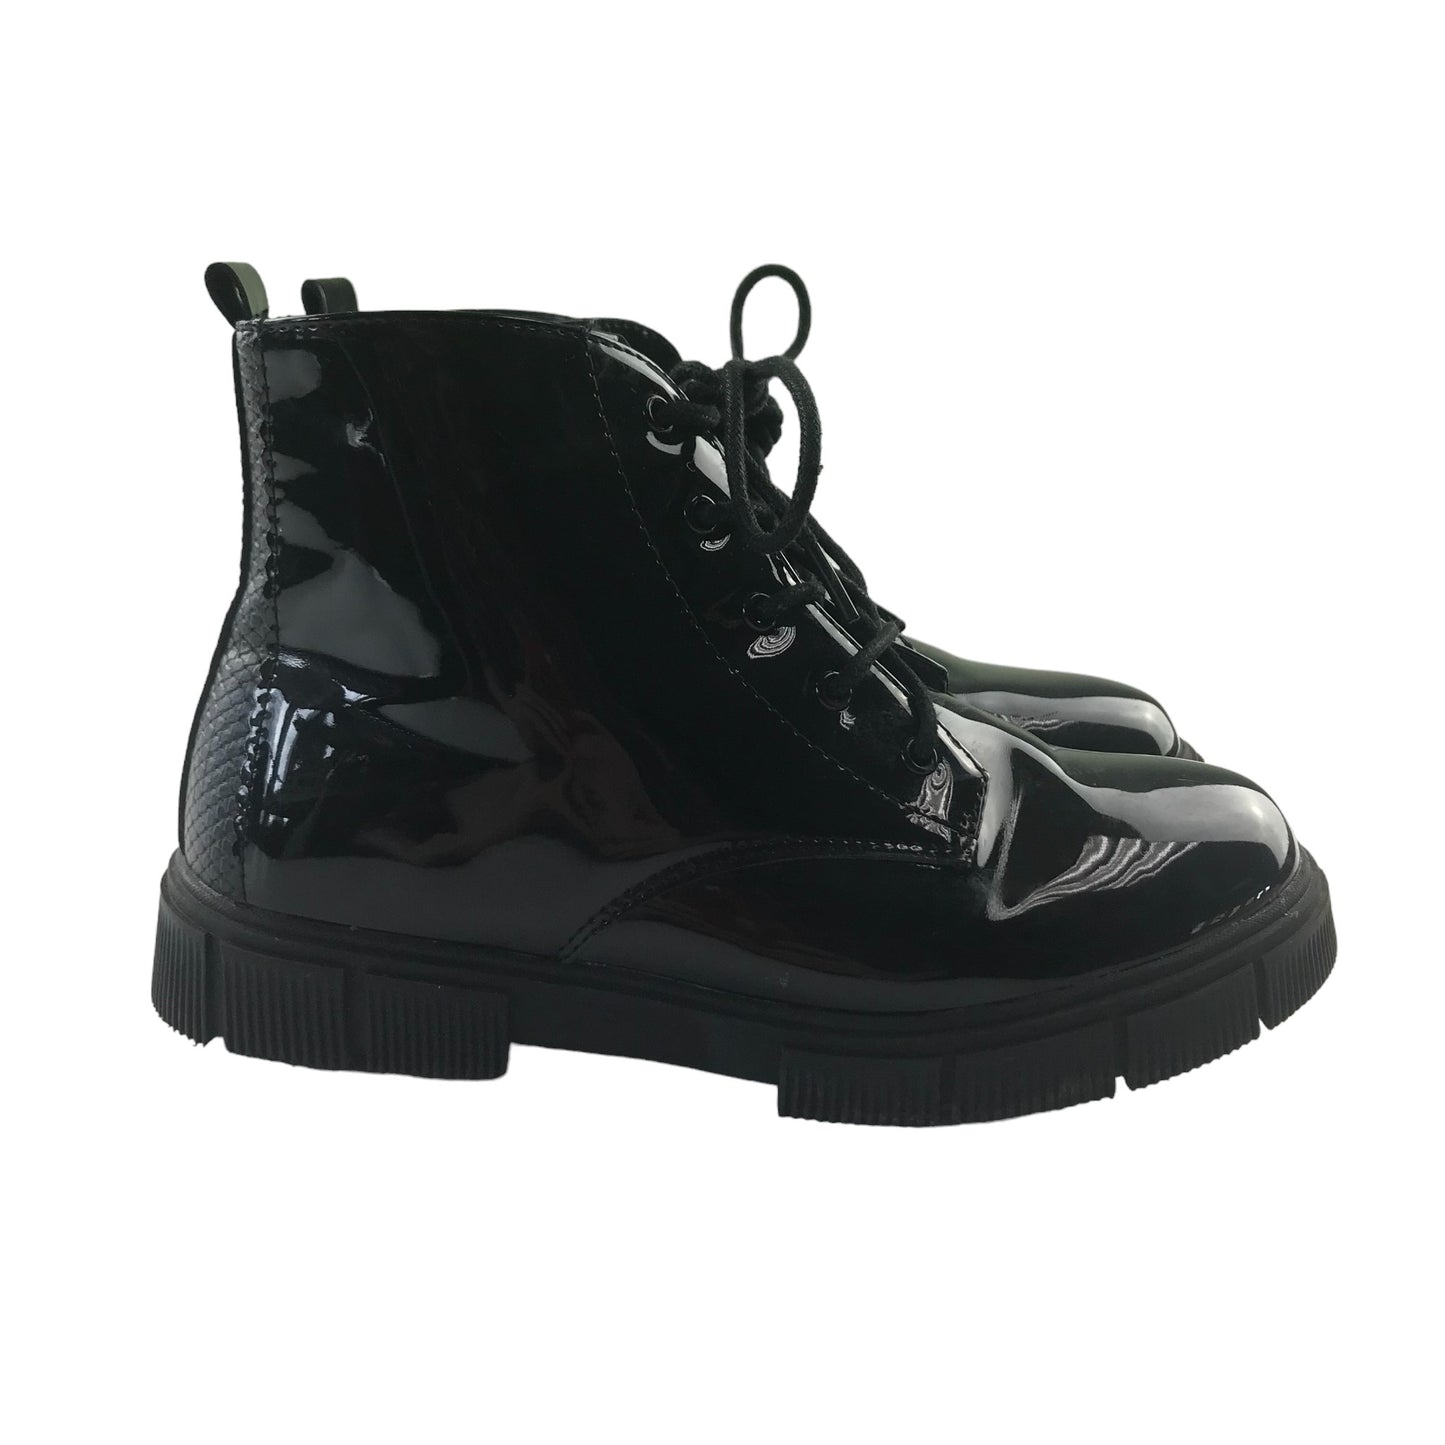 Schuh Boots Shoe Size 2 Black Glossy Hight Tops with Laces and Zipper